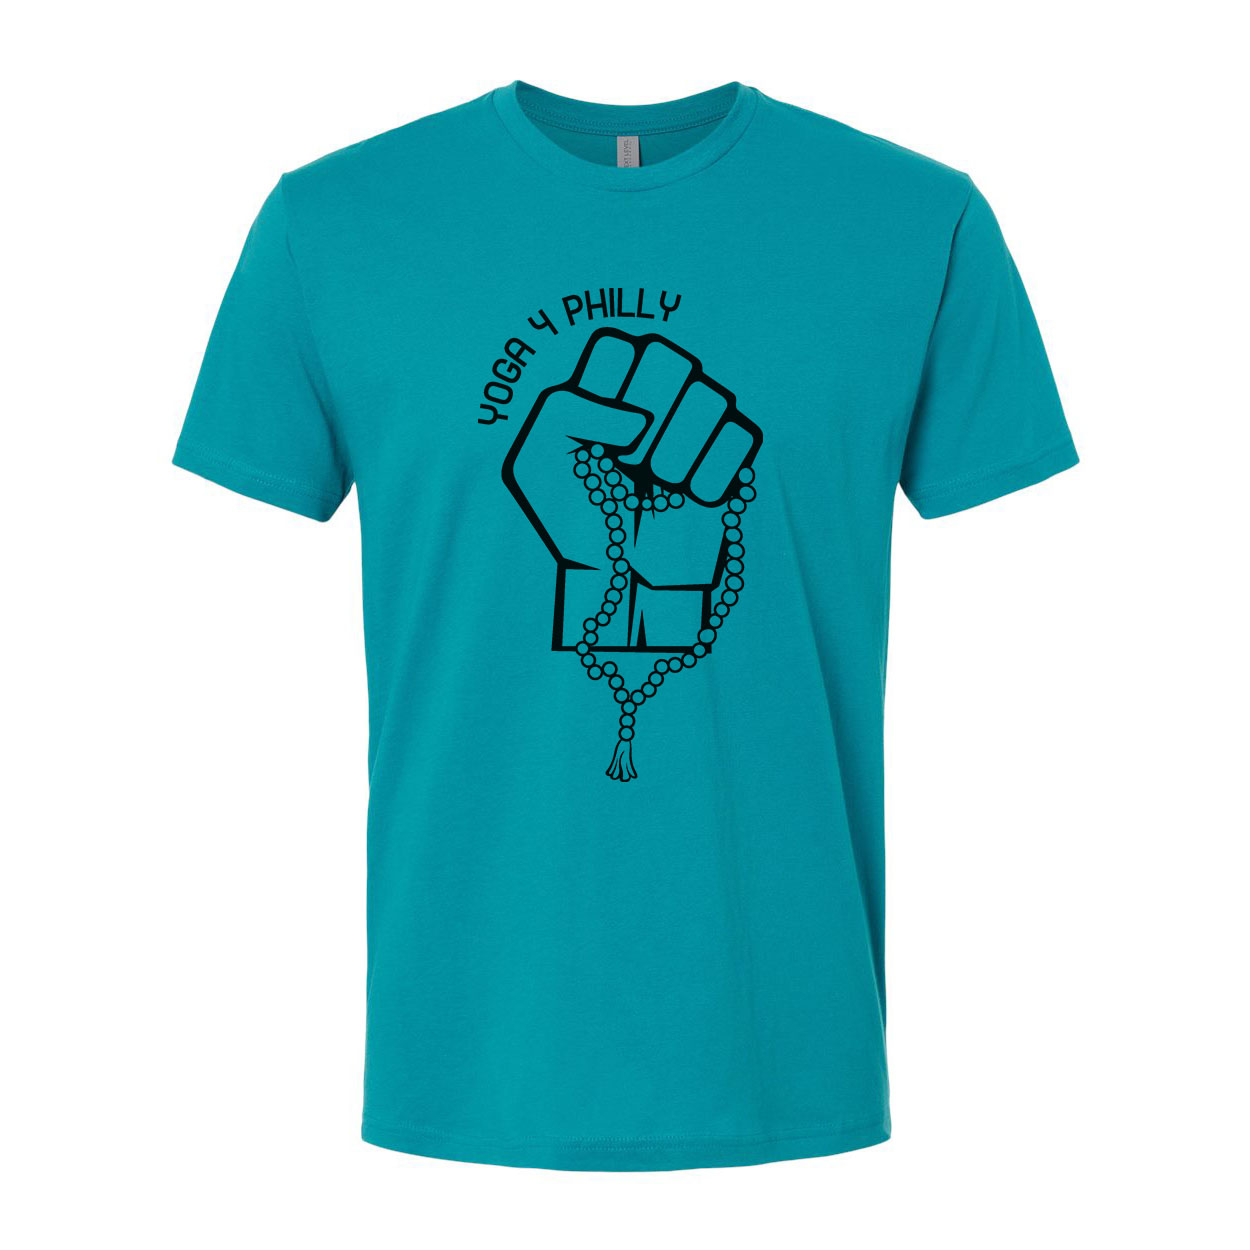 Yoga4Philly Teal Next Level T-Shirt